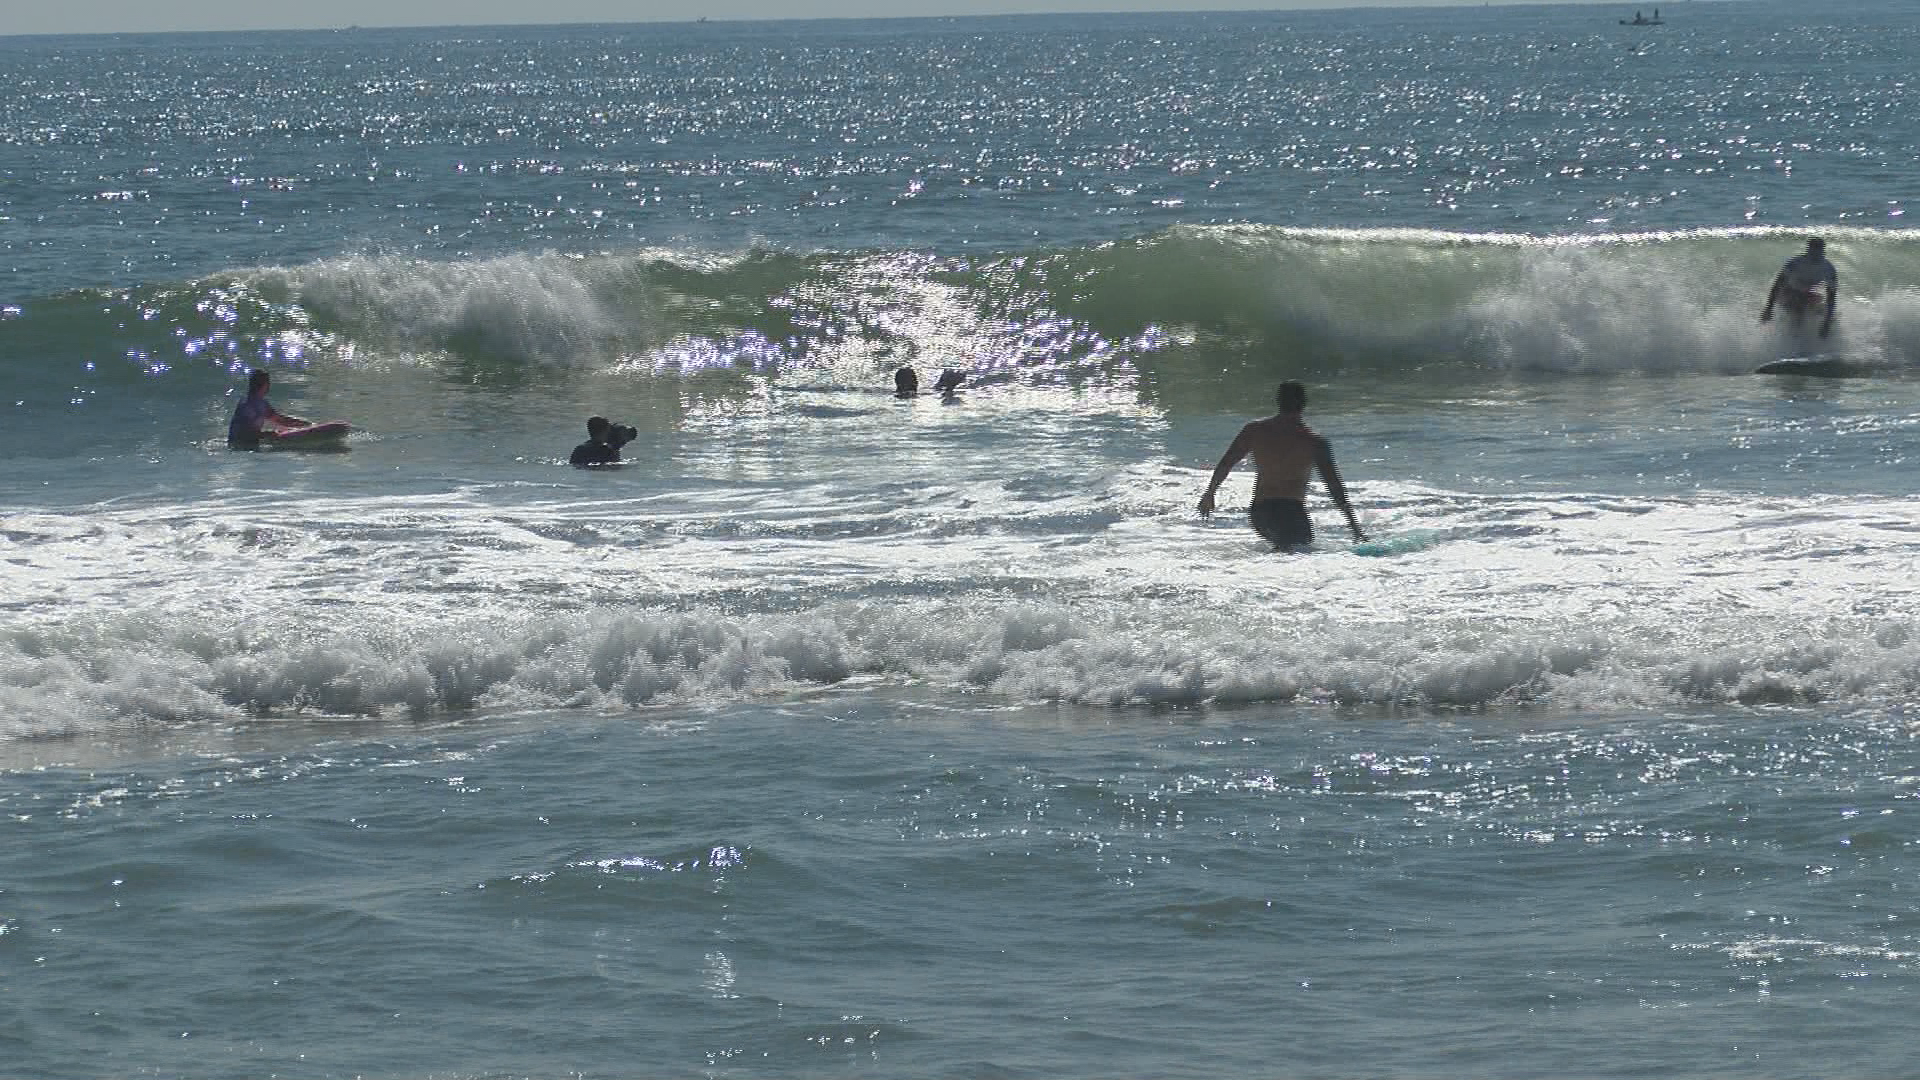 Surfing event at Wrightsville Beach brings young athletes and professionals together